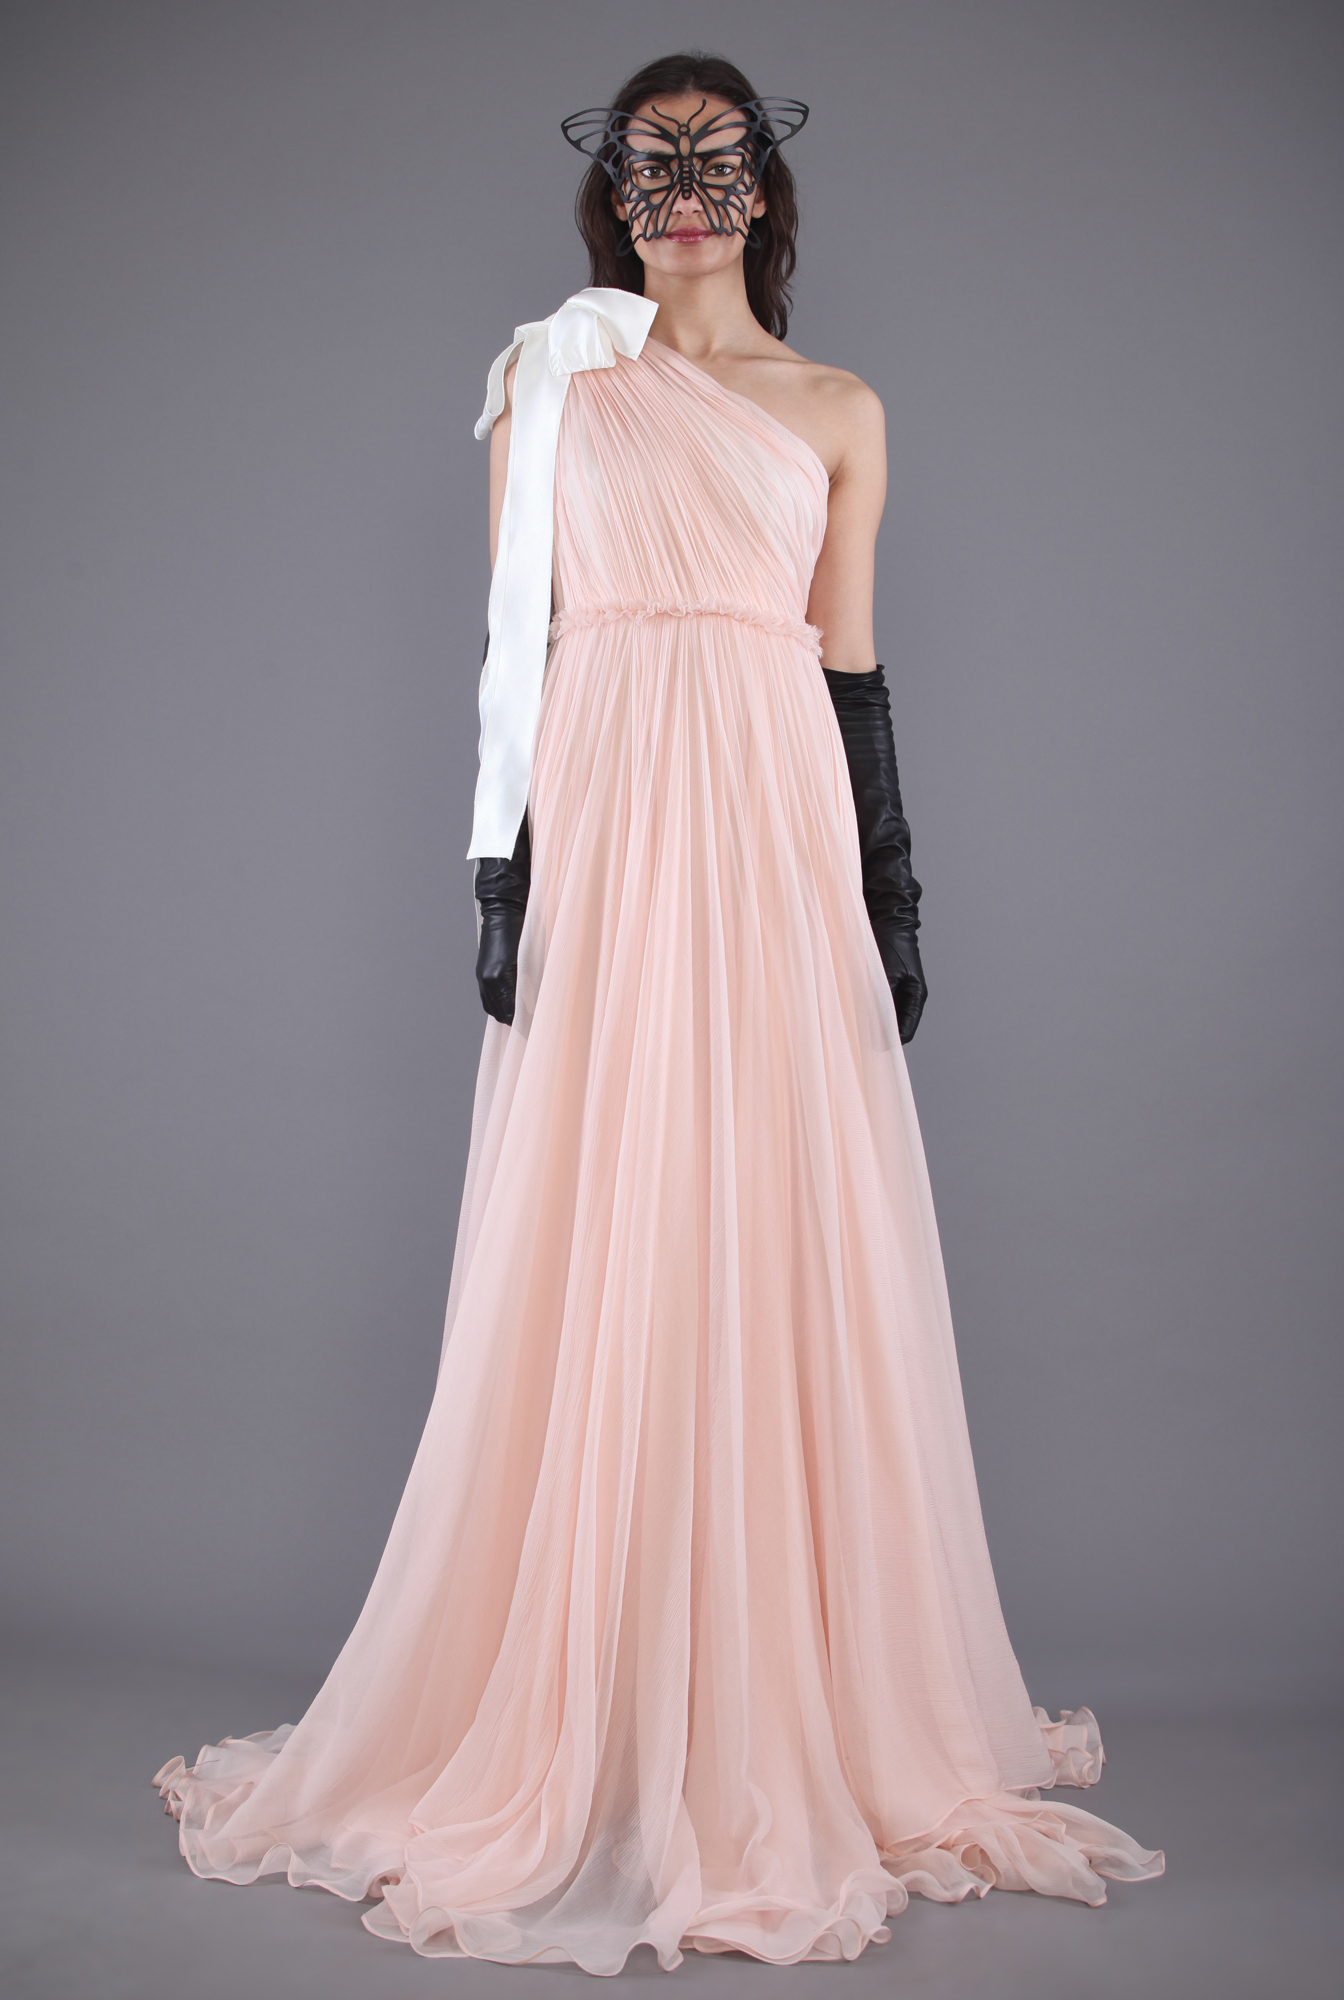 From blush pinks creams and soft grays all of her dresses are flowy and 